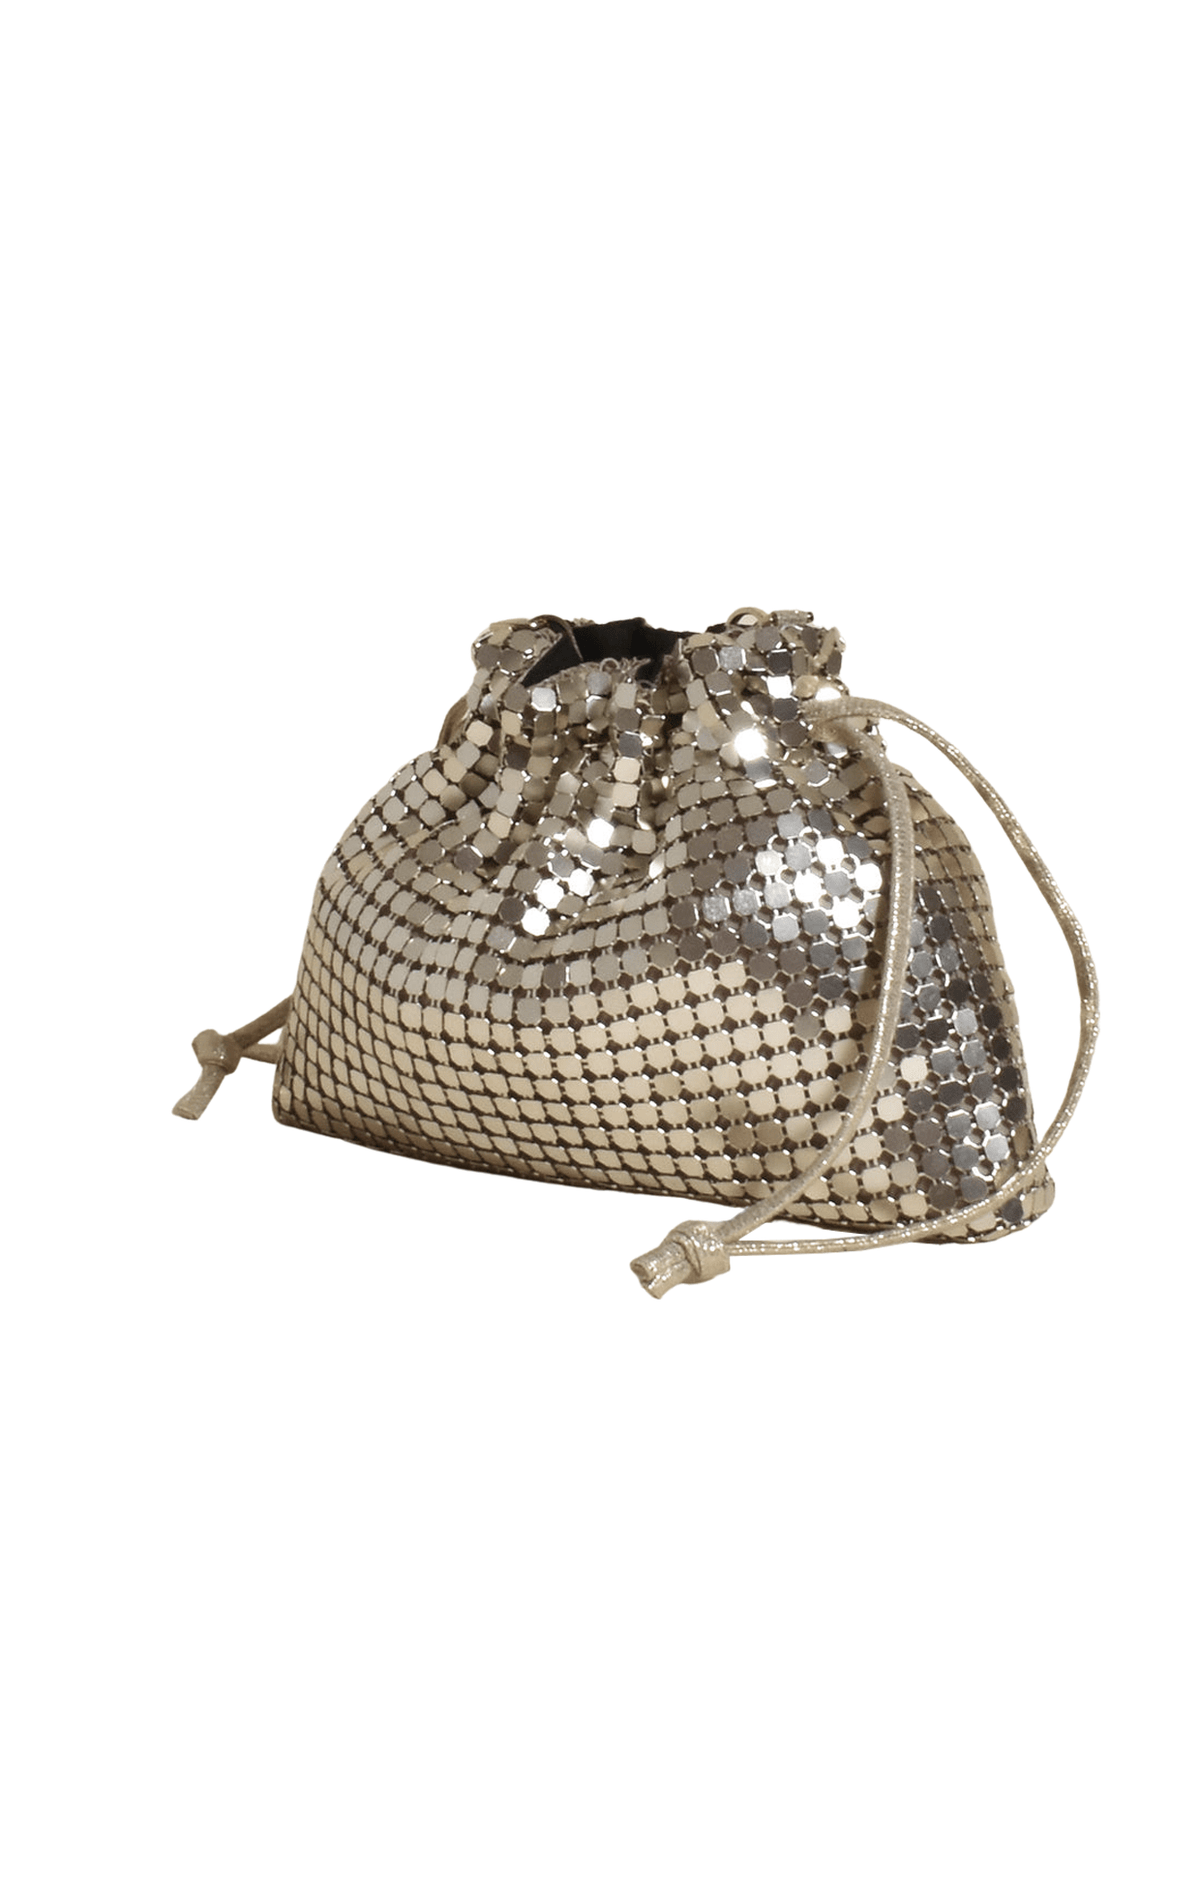 ACCESSORIES Bags Clutches One Size / Neutral KENZIE DRAWSTRING MESH EVENT BAG IN GOLD